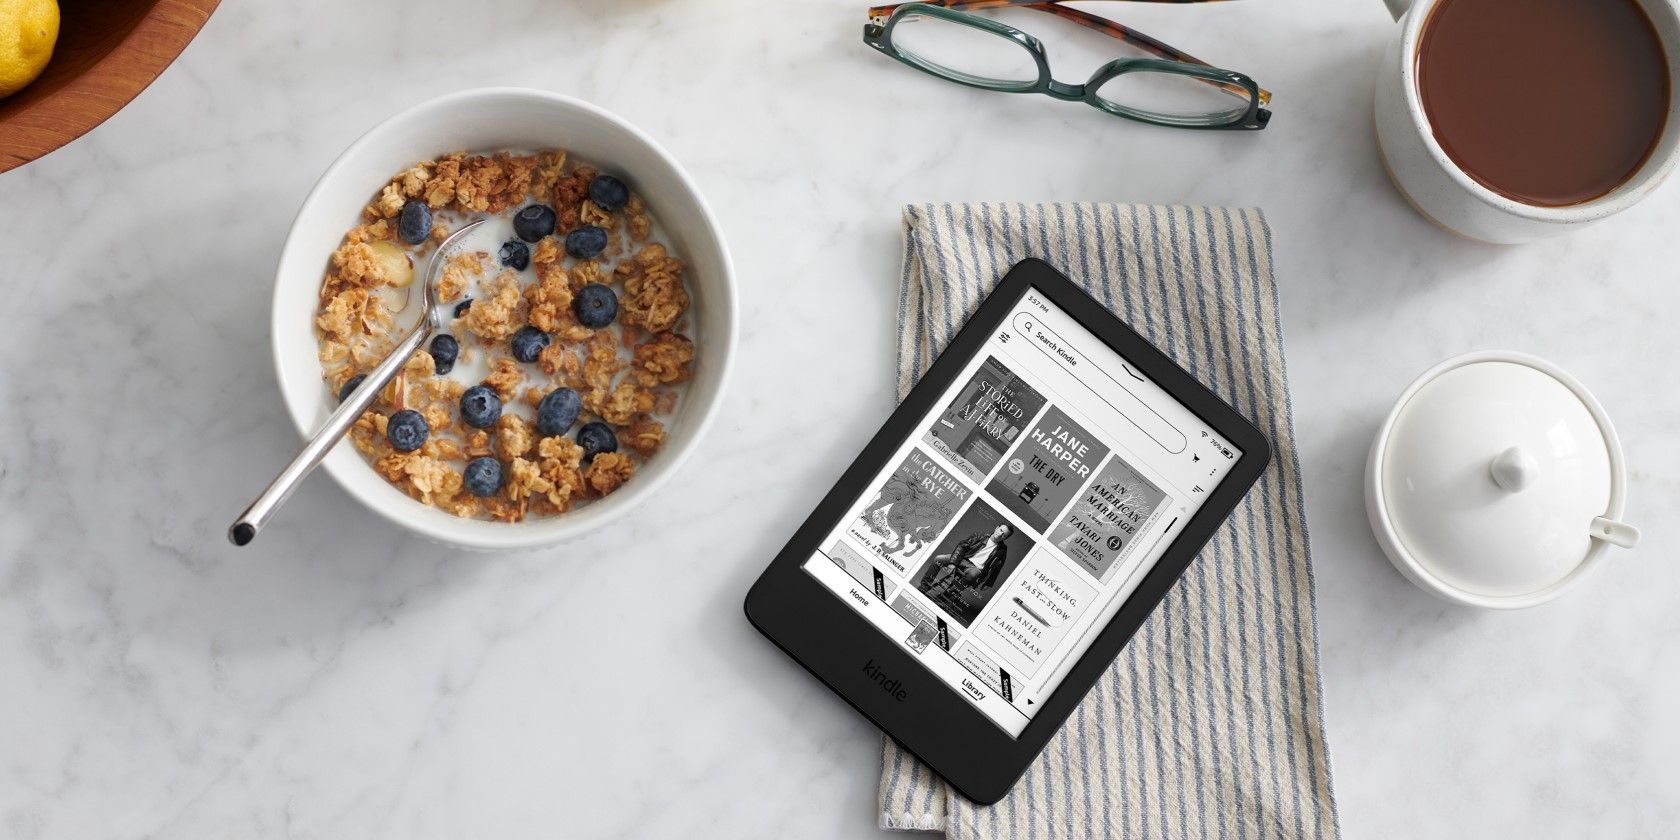 Amazon Kindle on a white breakfast table